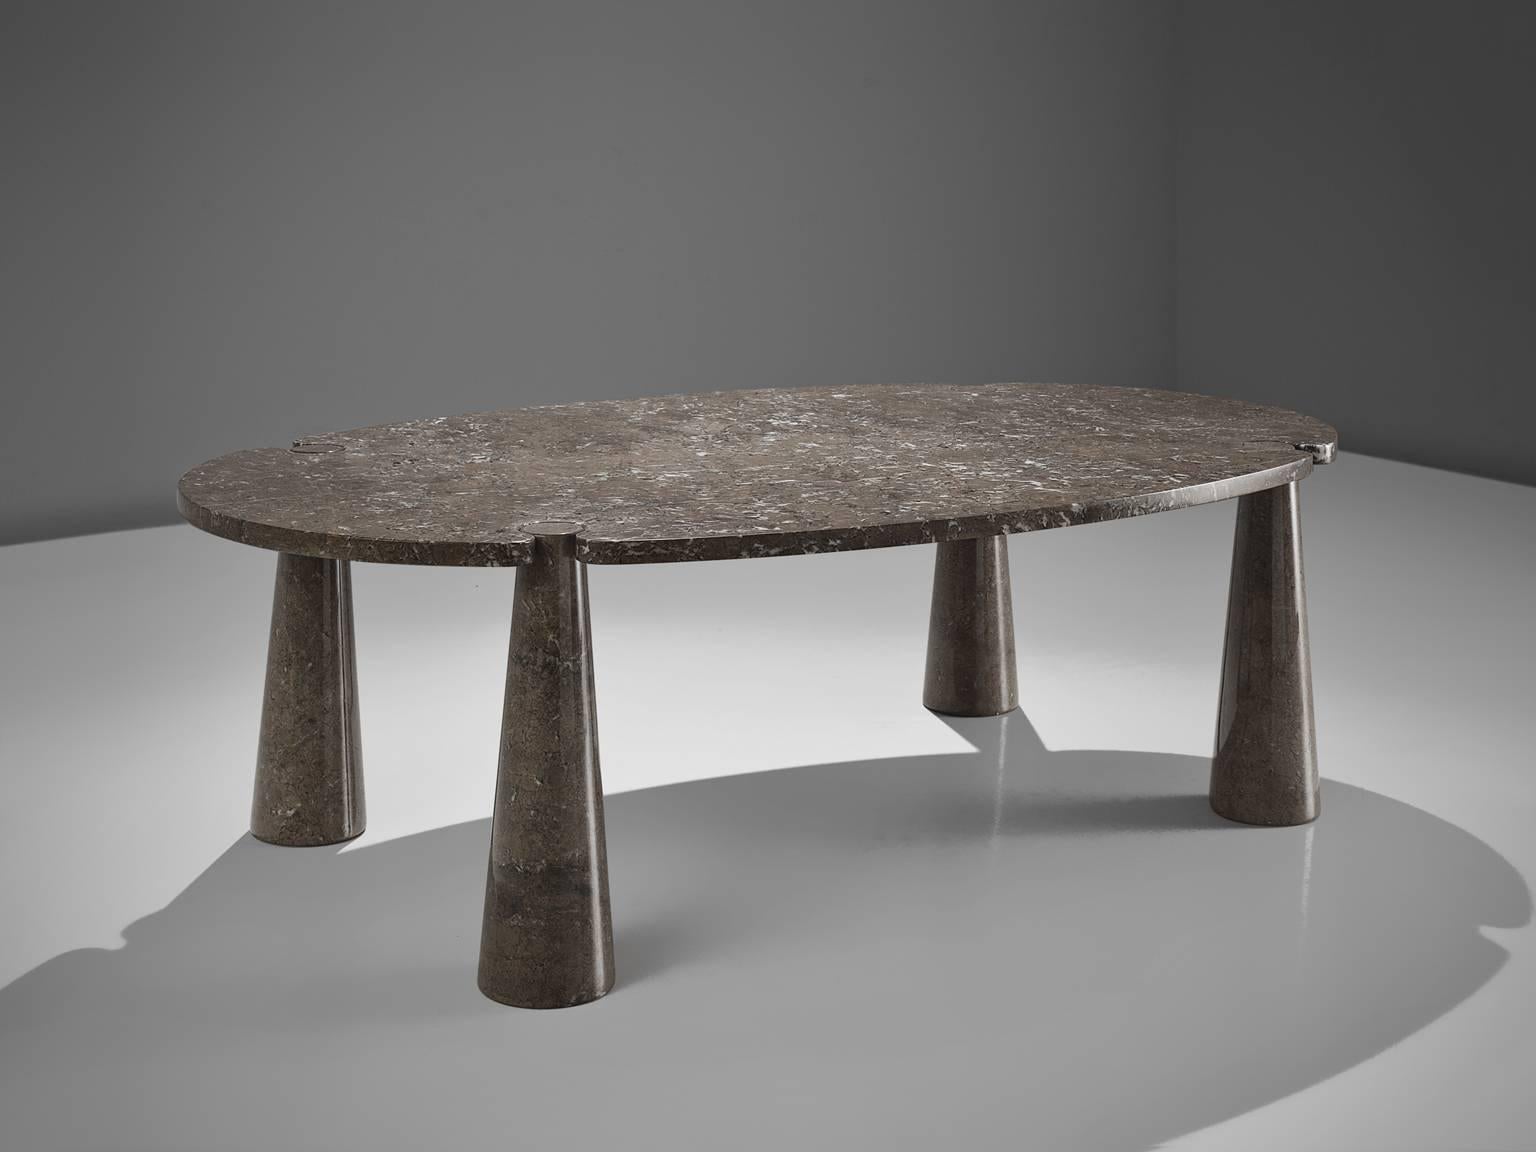 Angelo Mangiarotti, dining table, marble, 1970s. 

This sculptural table by Angelo Mangiarotti is a skillful example of postmodern design. The table is executed in grey marble. The oval table features no joints or clamps and is architectural in